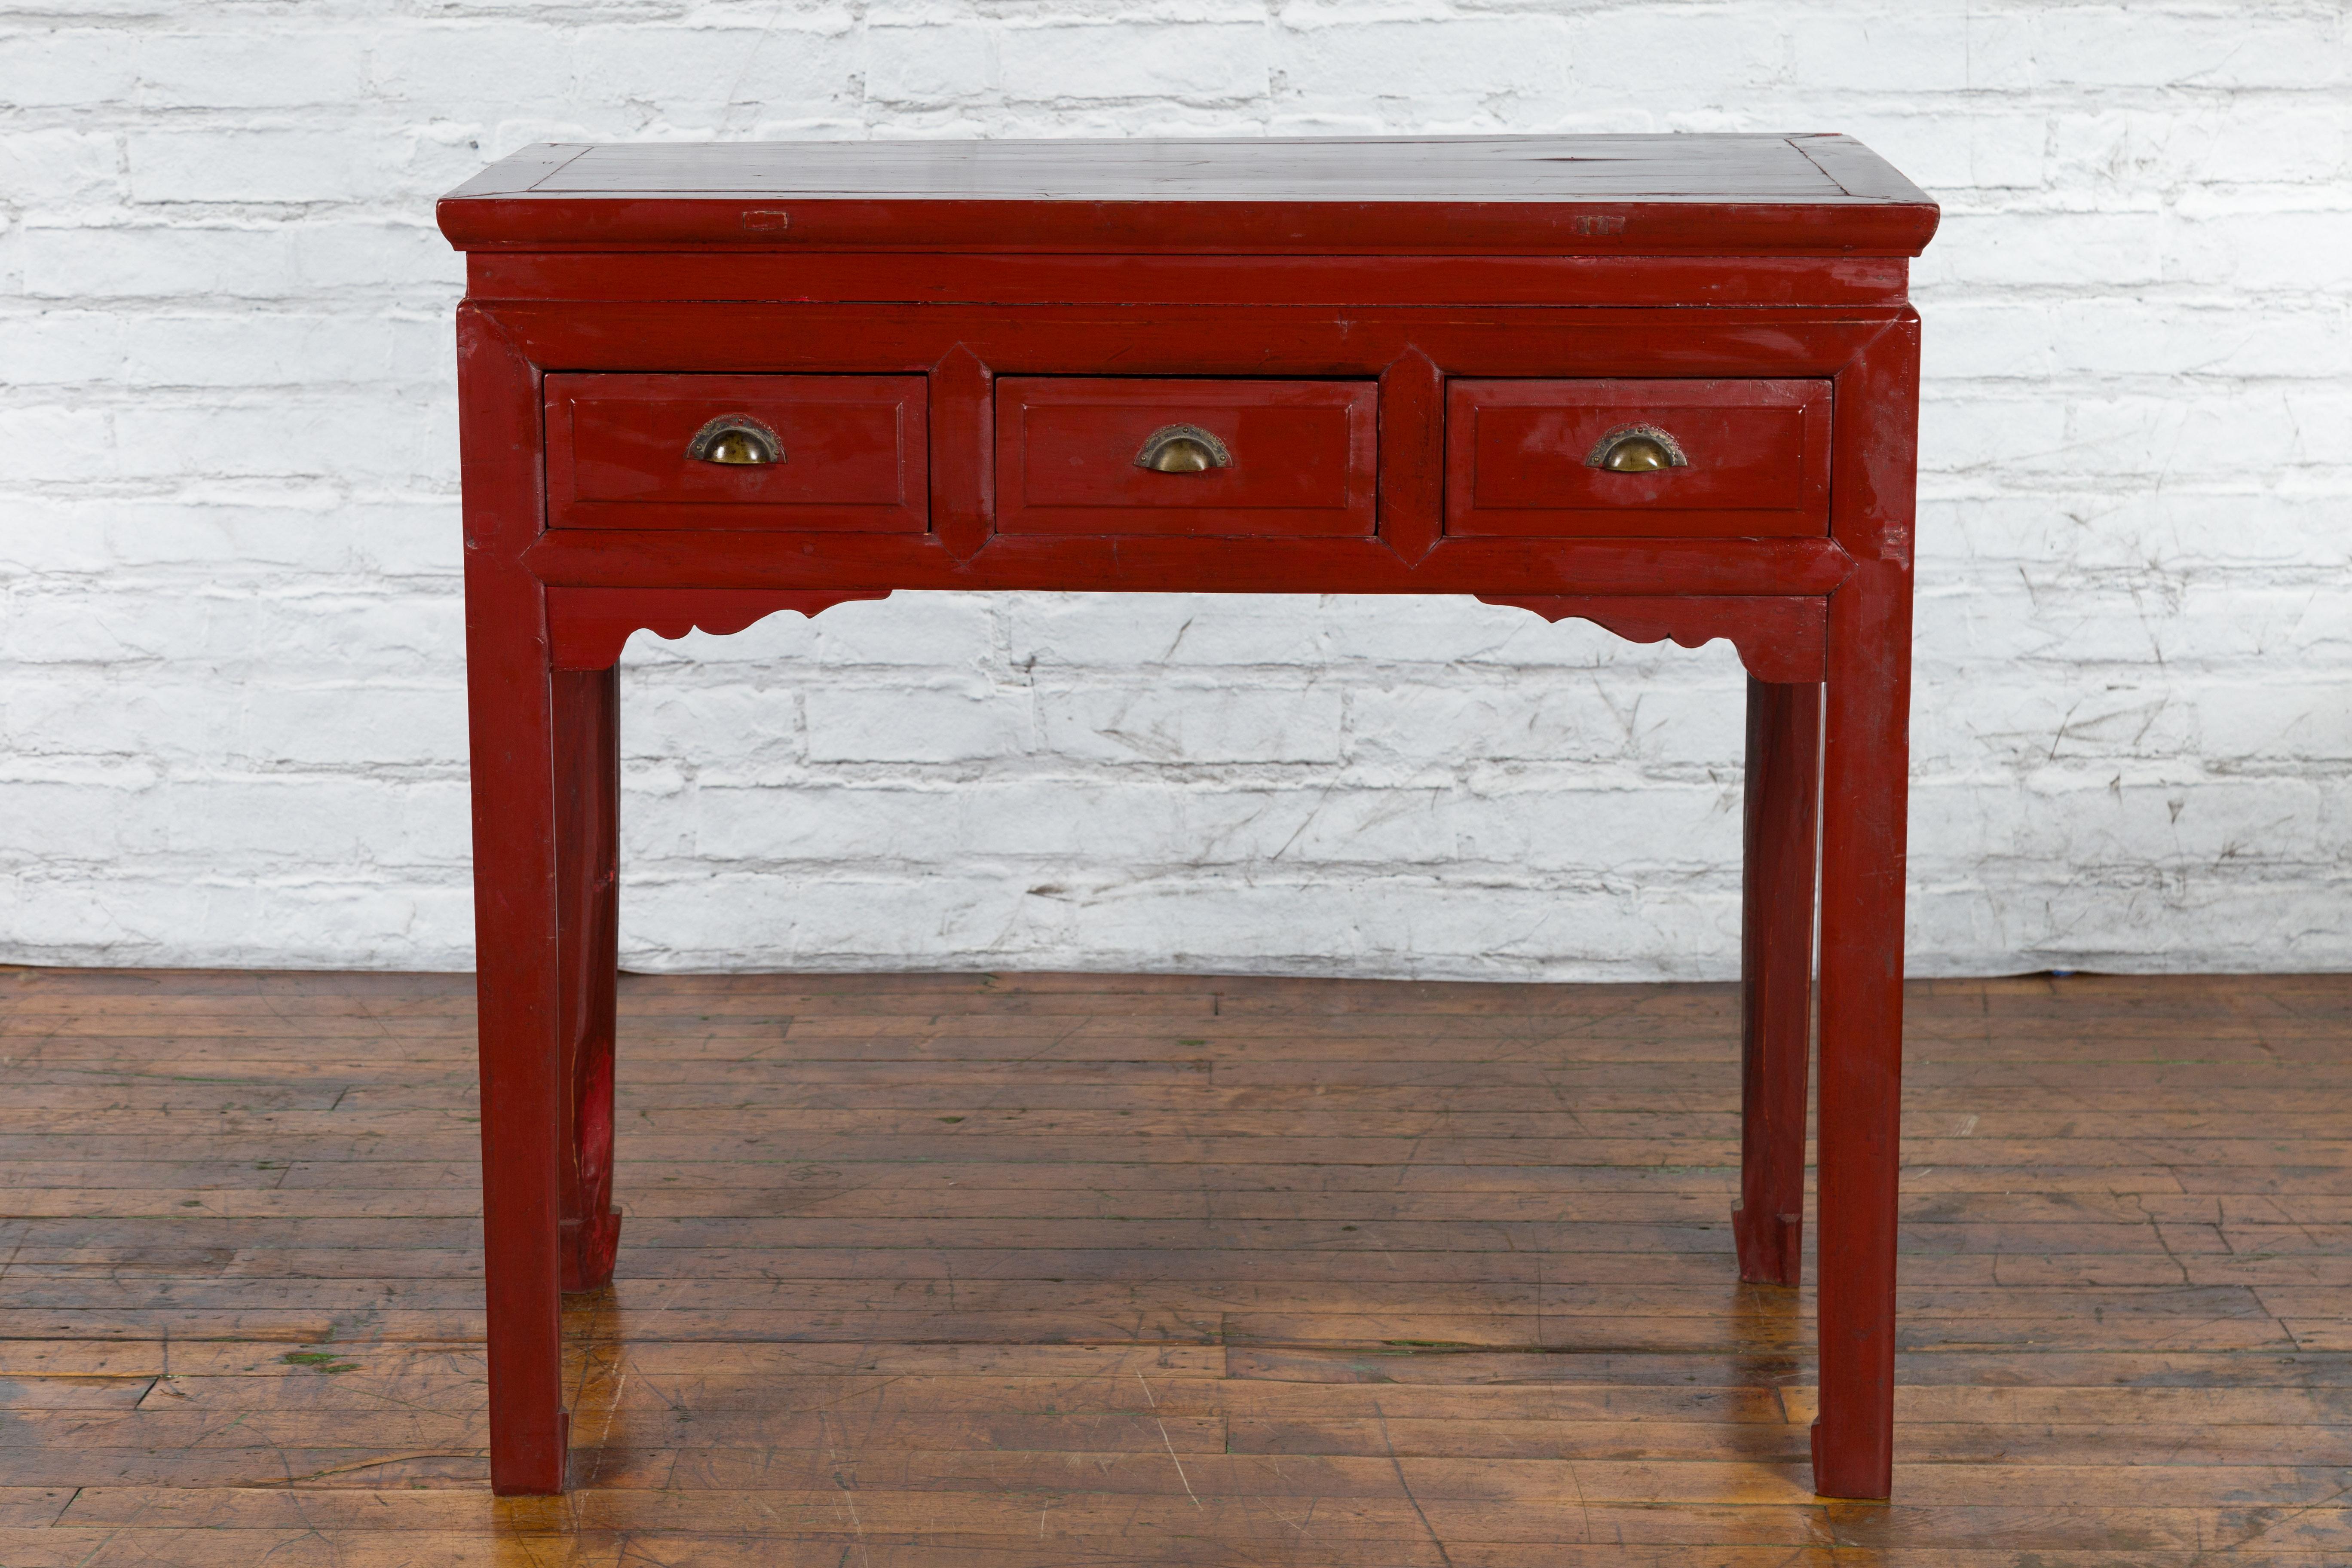 A vintage Chinese red lacquered console table from the mid 20th century, with three drawers, waisted top, carved spandrels and scalloped hardware. Created in China during the Midcentury period, this red lacquered console table features a rectangular